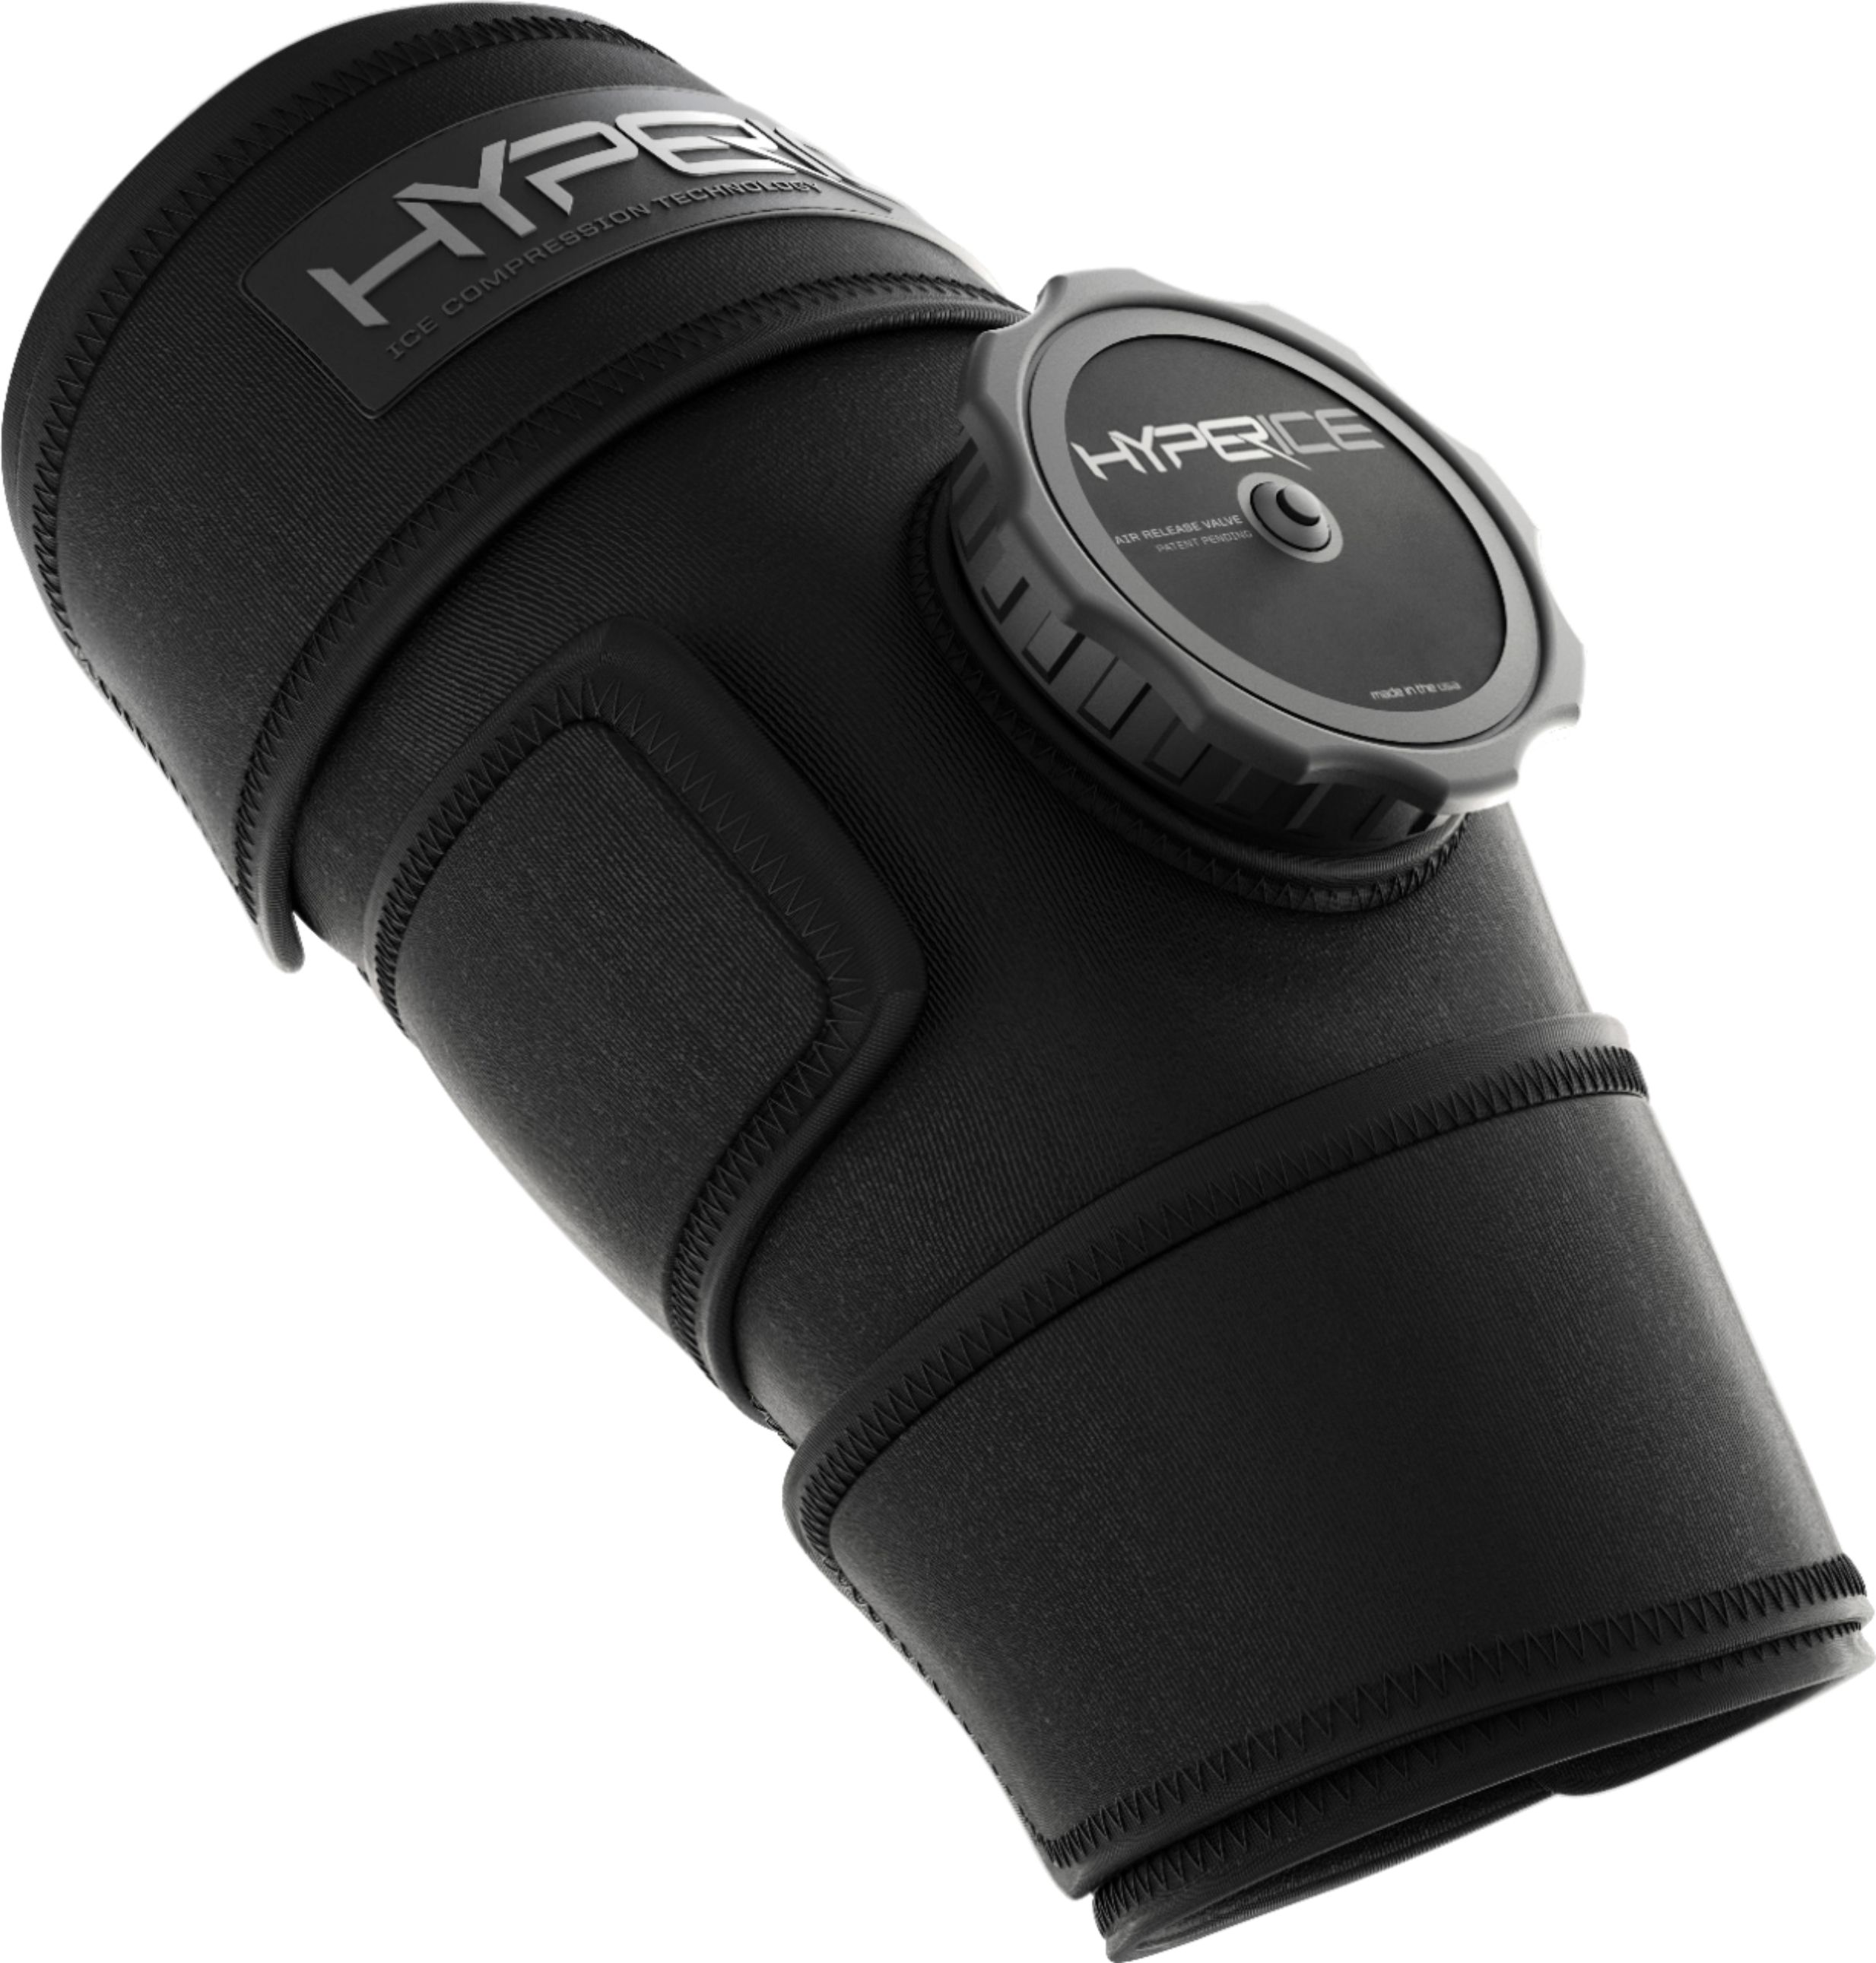 Angle View: Hyperice Knee Ice Compression Wearable - Gray/Black